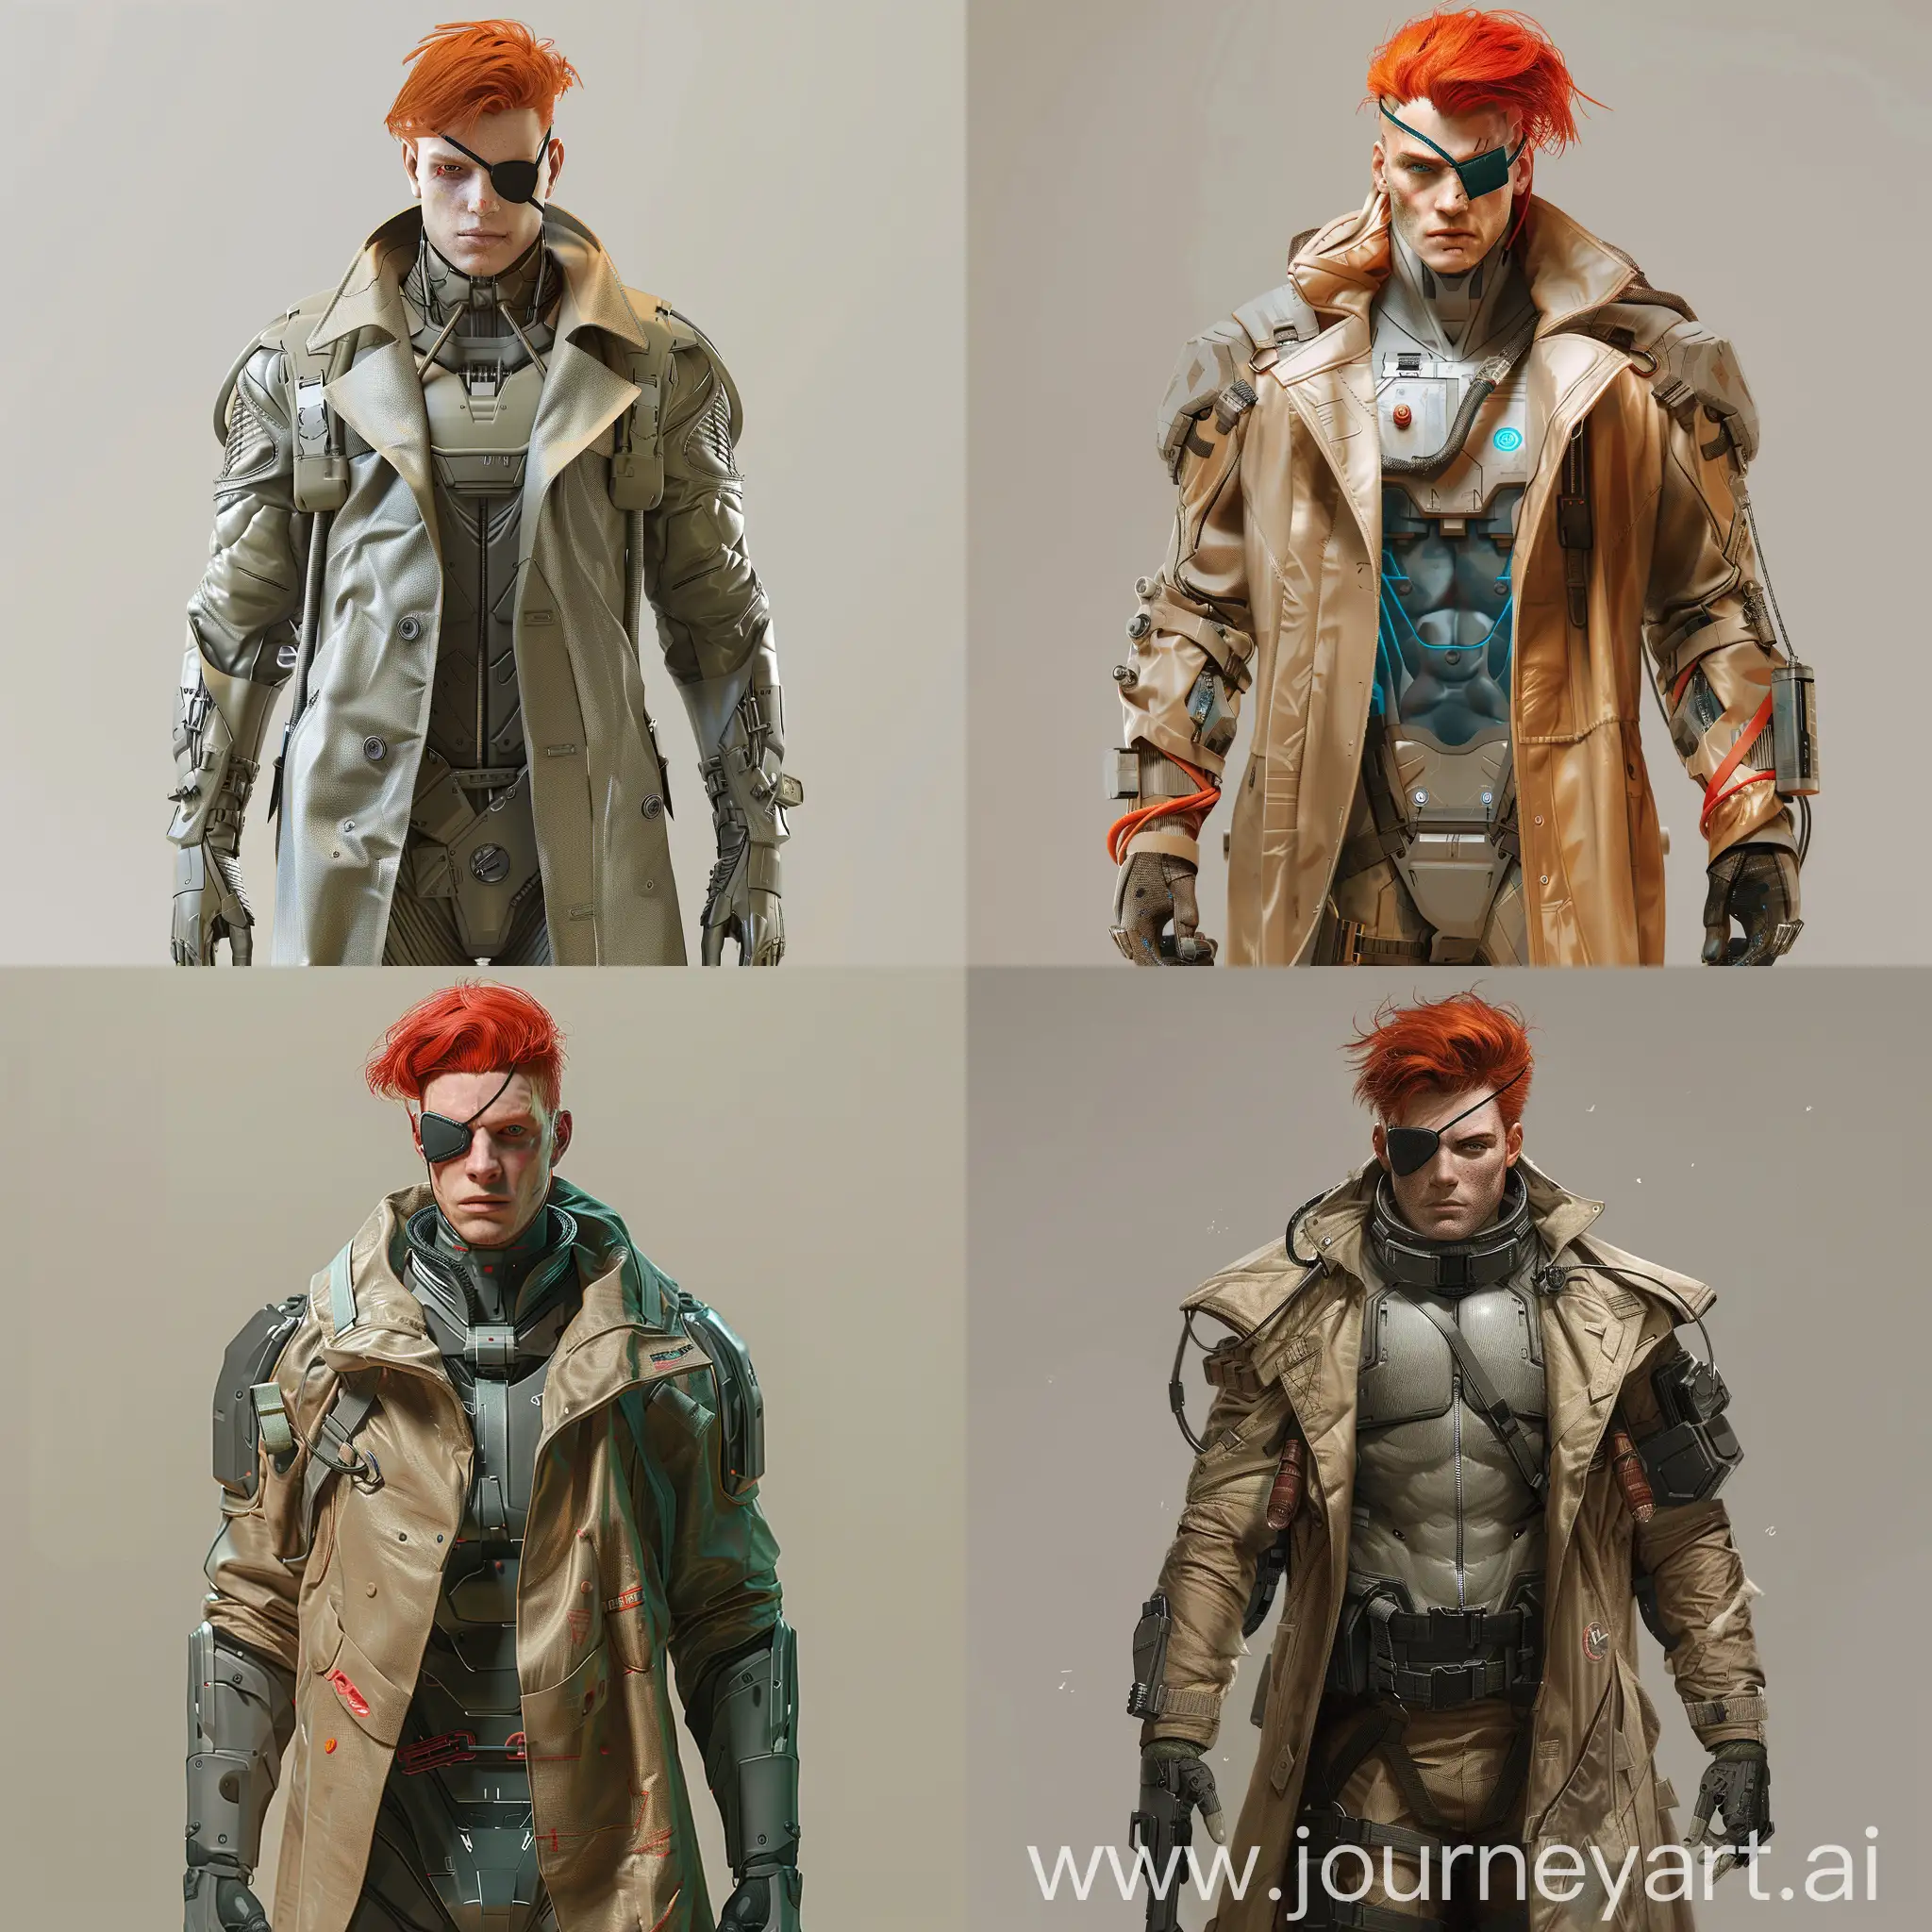 Cyberpunk-RedHaired-Warrior-in-Protective-Suit-and-Trench-Coat